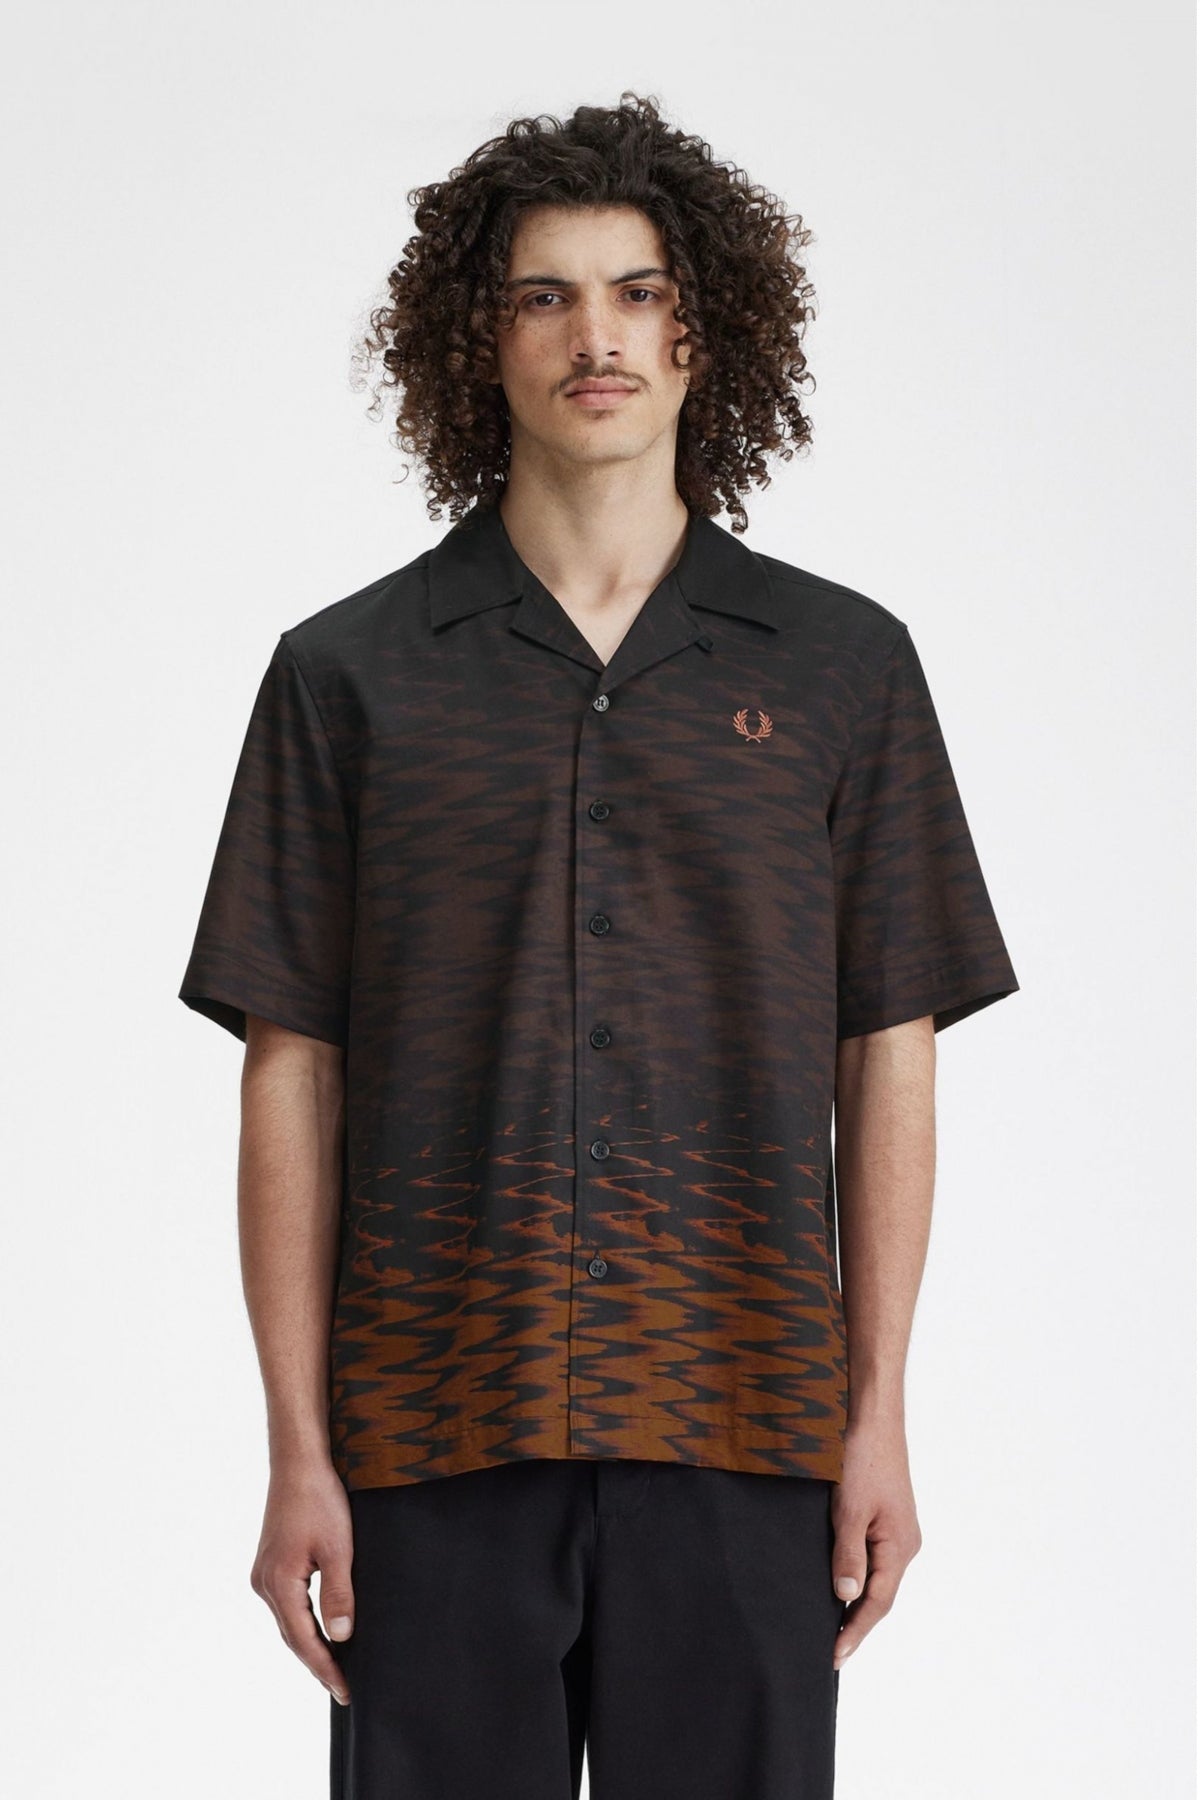 FRED PERRY WAVE GRAPHIC REVERE COLLAR en color NEGRO  (1)